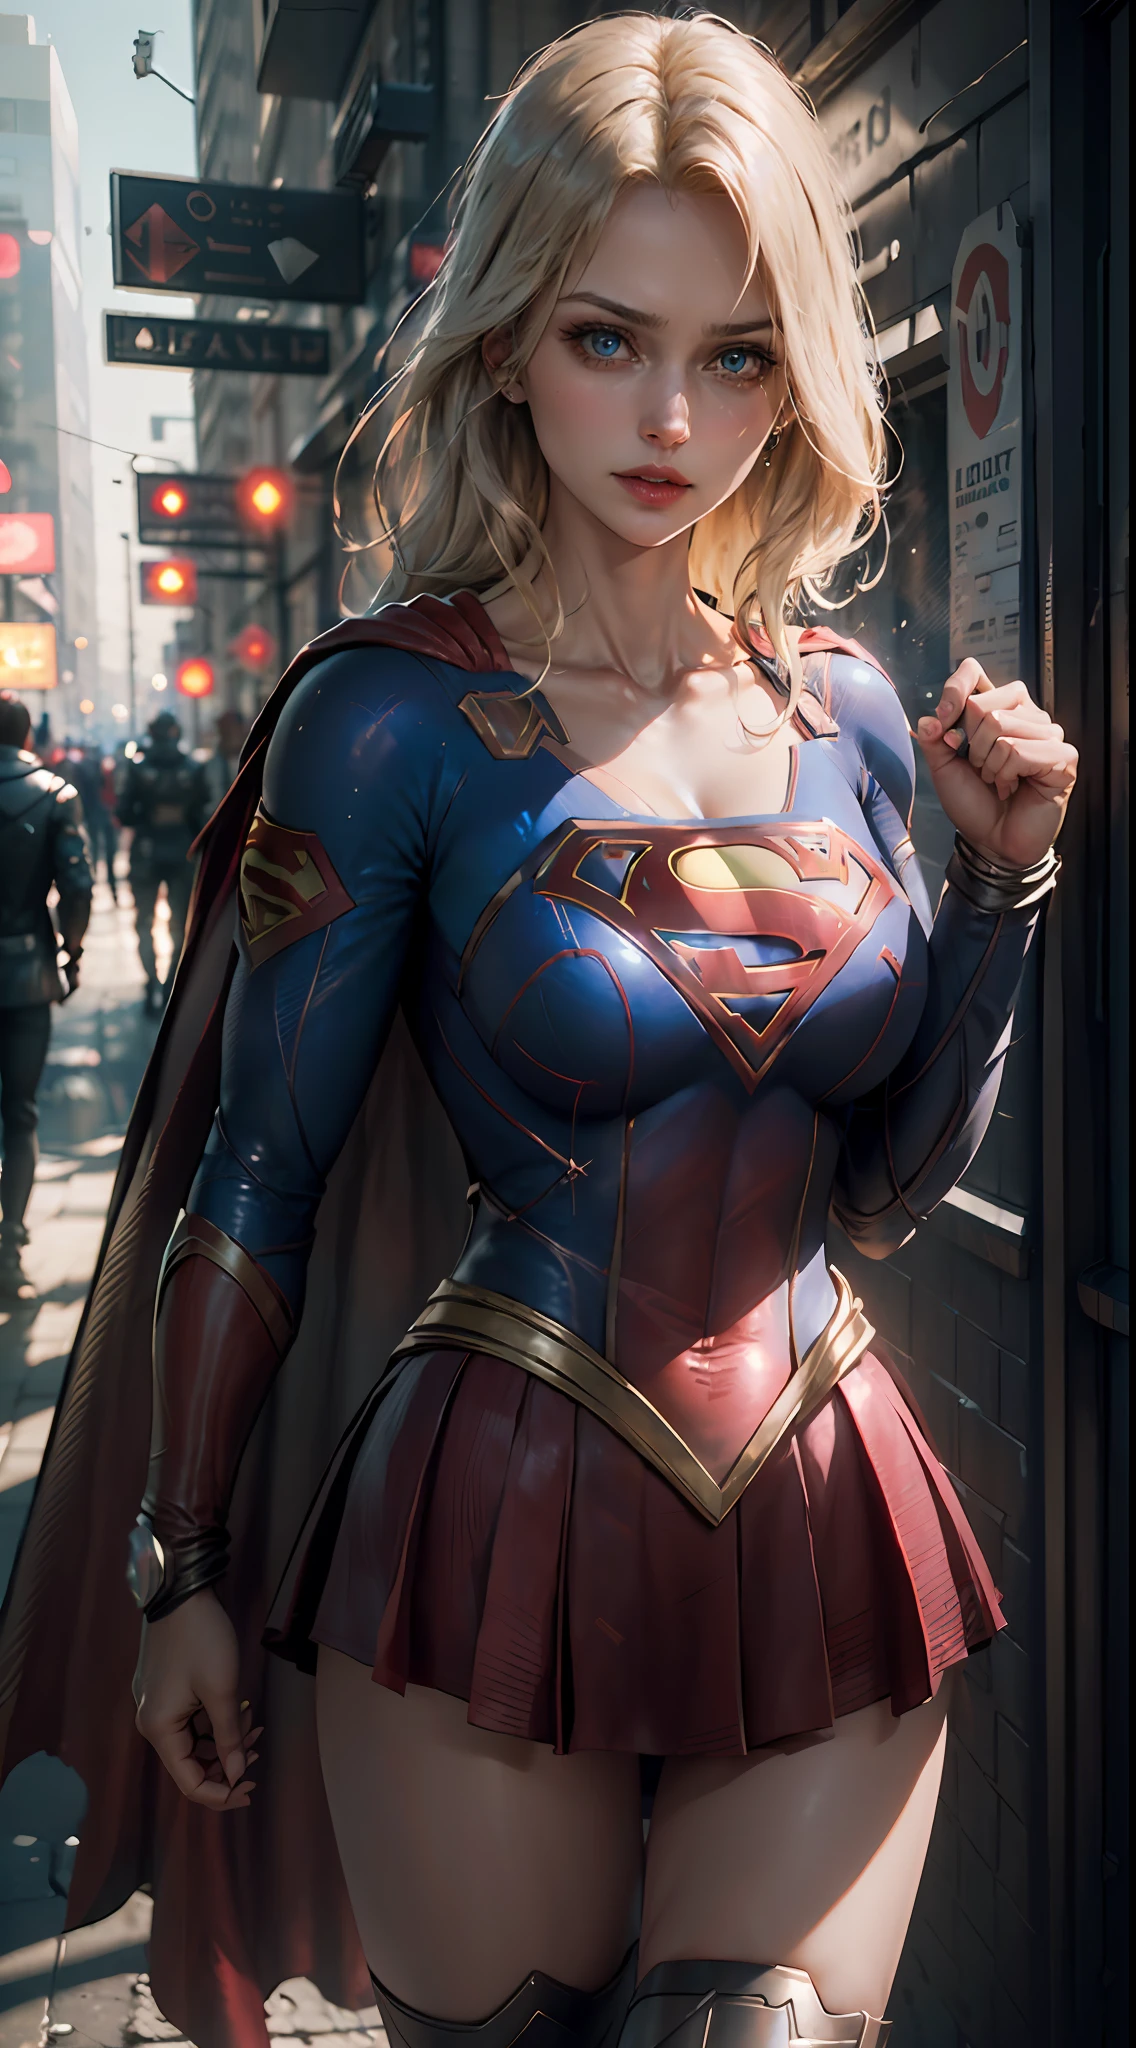 ((Best Supergirl Quality)), ((masterpiece)), (detailed: 1.4), 3D, an image of a beautiful blonde woman with cyberpunk blue eyes,HDR (High Dynamic Range),Ray Tracing,NVIDIA RTX,Super-Resolution,Unreal 5,Subsurface Dispersion, PBR Texture, Post-processing, Anisotropic filtering, Depth of field, Maximum clarity and sharpness, Multilayer textures, Albedo and specular maps, Surface shading, Accurate simulation of light-material interaction,  Perfect Proportions, Octane Render, Two-Tone Lighting,Wide Aperture,Low ISO,White Balance,Rule of Thirds,8K RAW, Using Superman S symbol on Chest. Cyberpunk.